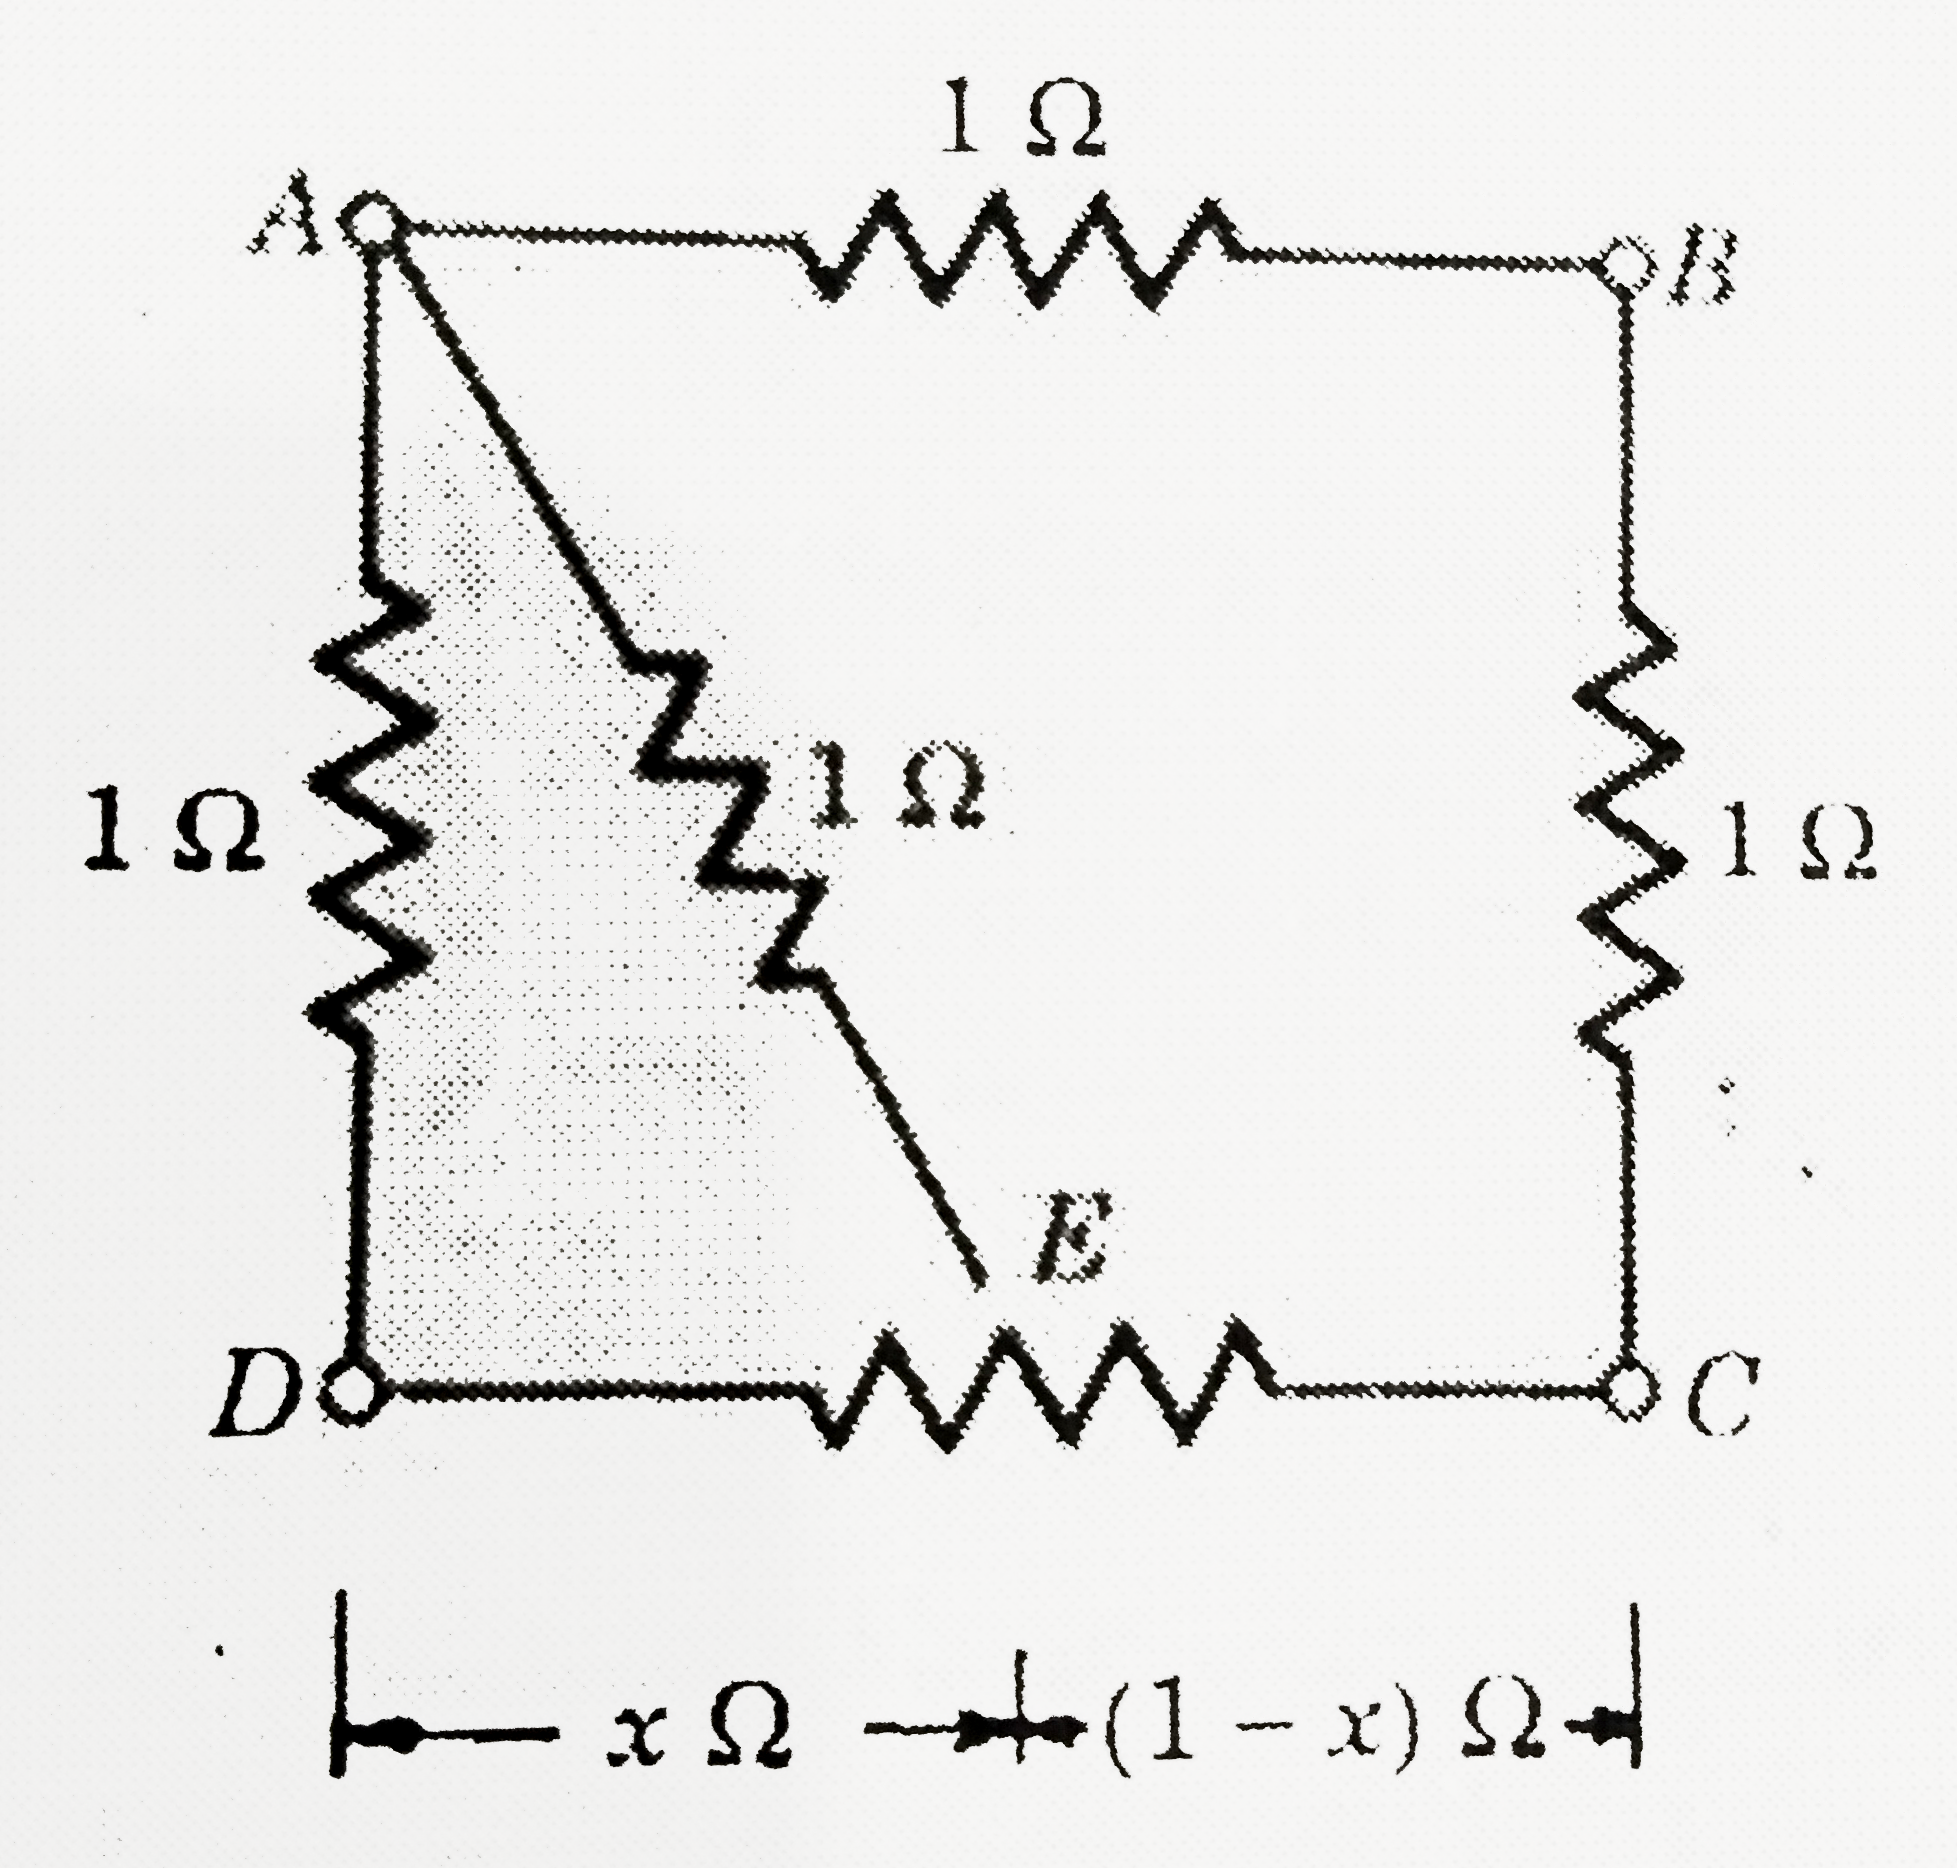 In figure. ABCD is a square where side is a uniform wire of resistance 1Omega. Find the a point E on CD such that if a uniform wire of resistance 1Omega is connected across AE and a constant potential differene is applied across A and C the points B and E are equipotential.